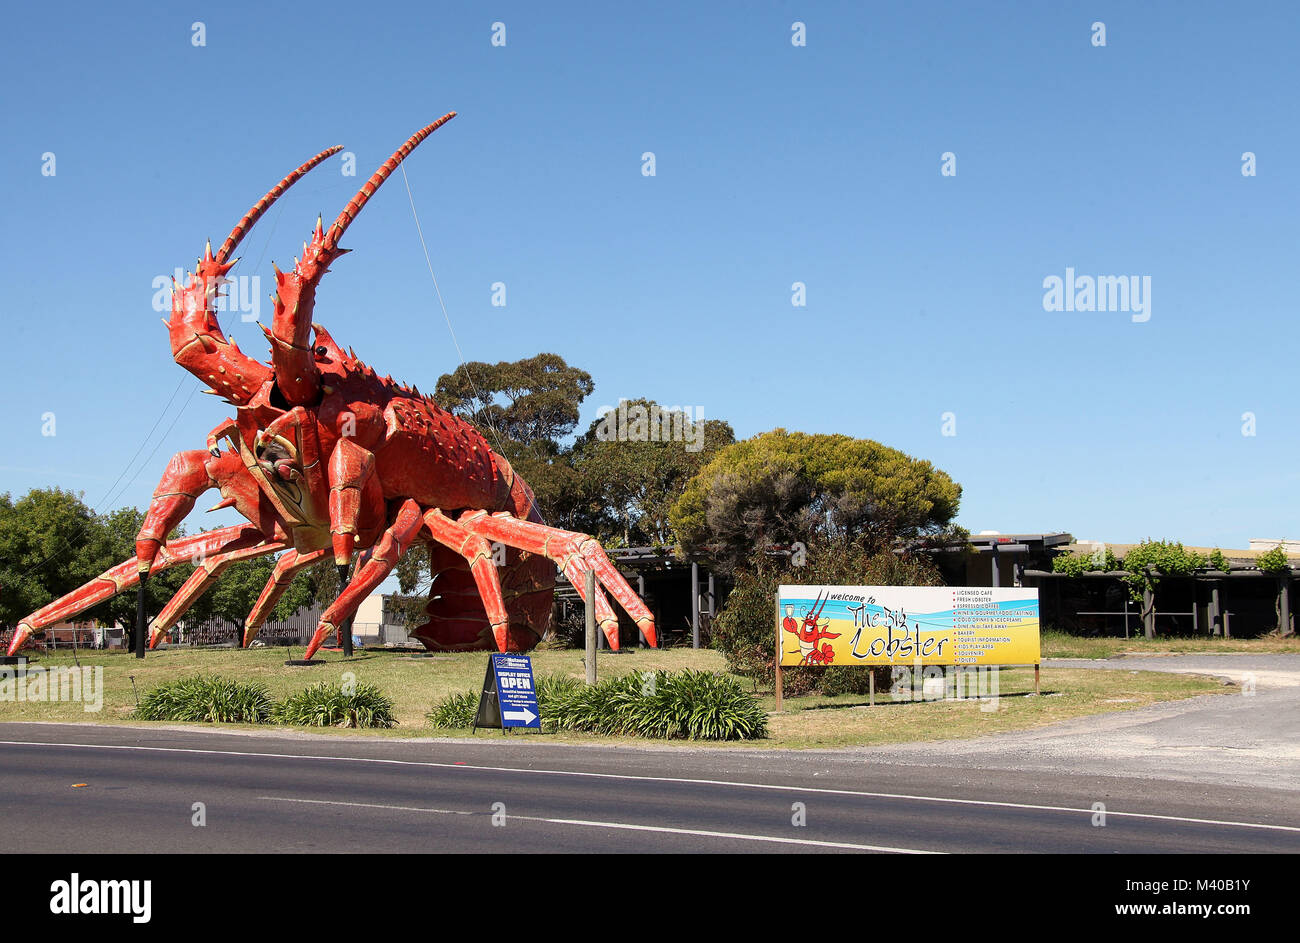 The Big Lobster Cafe in Australia Stock Photo